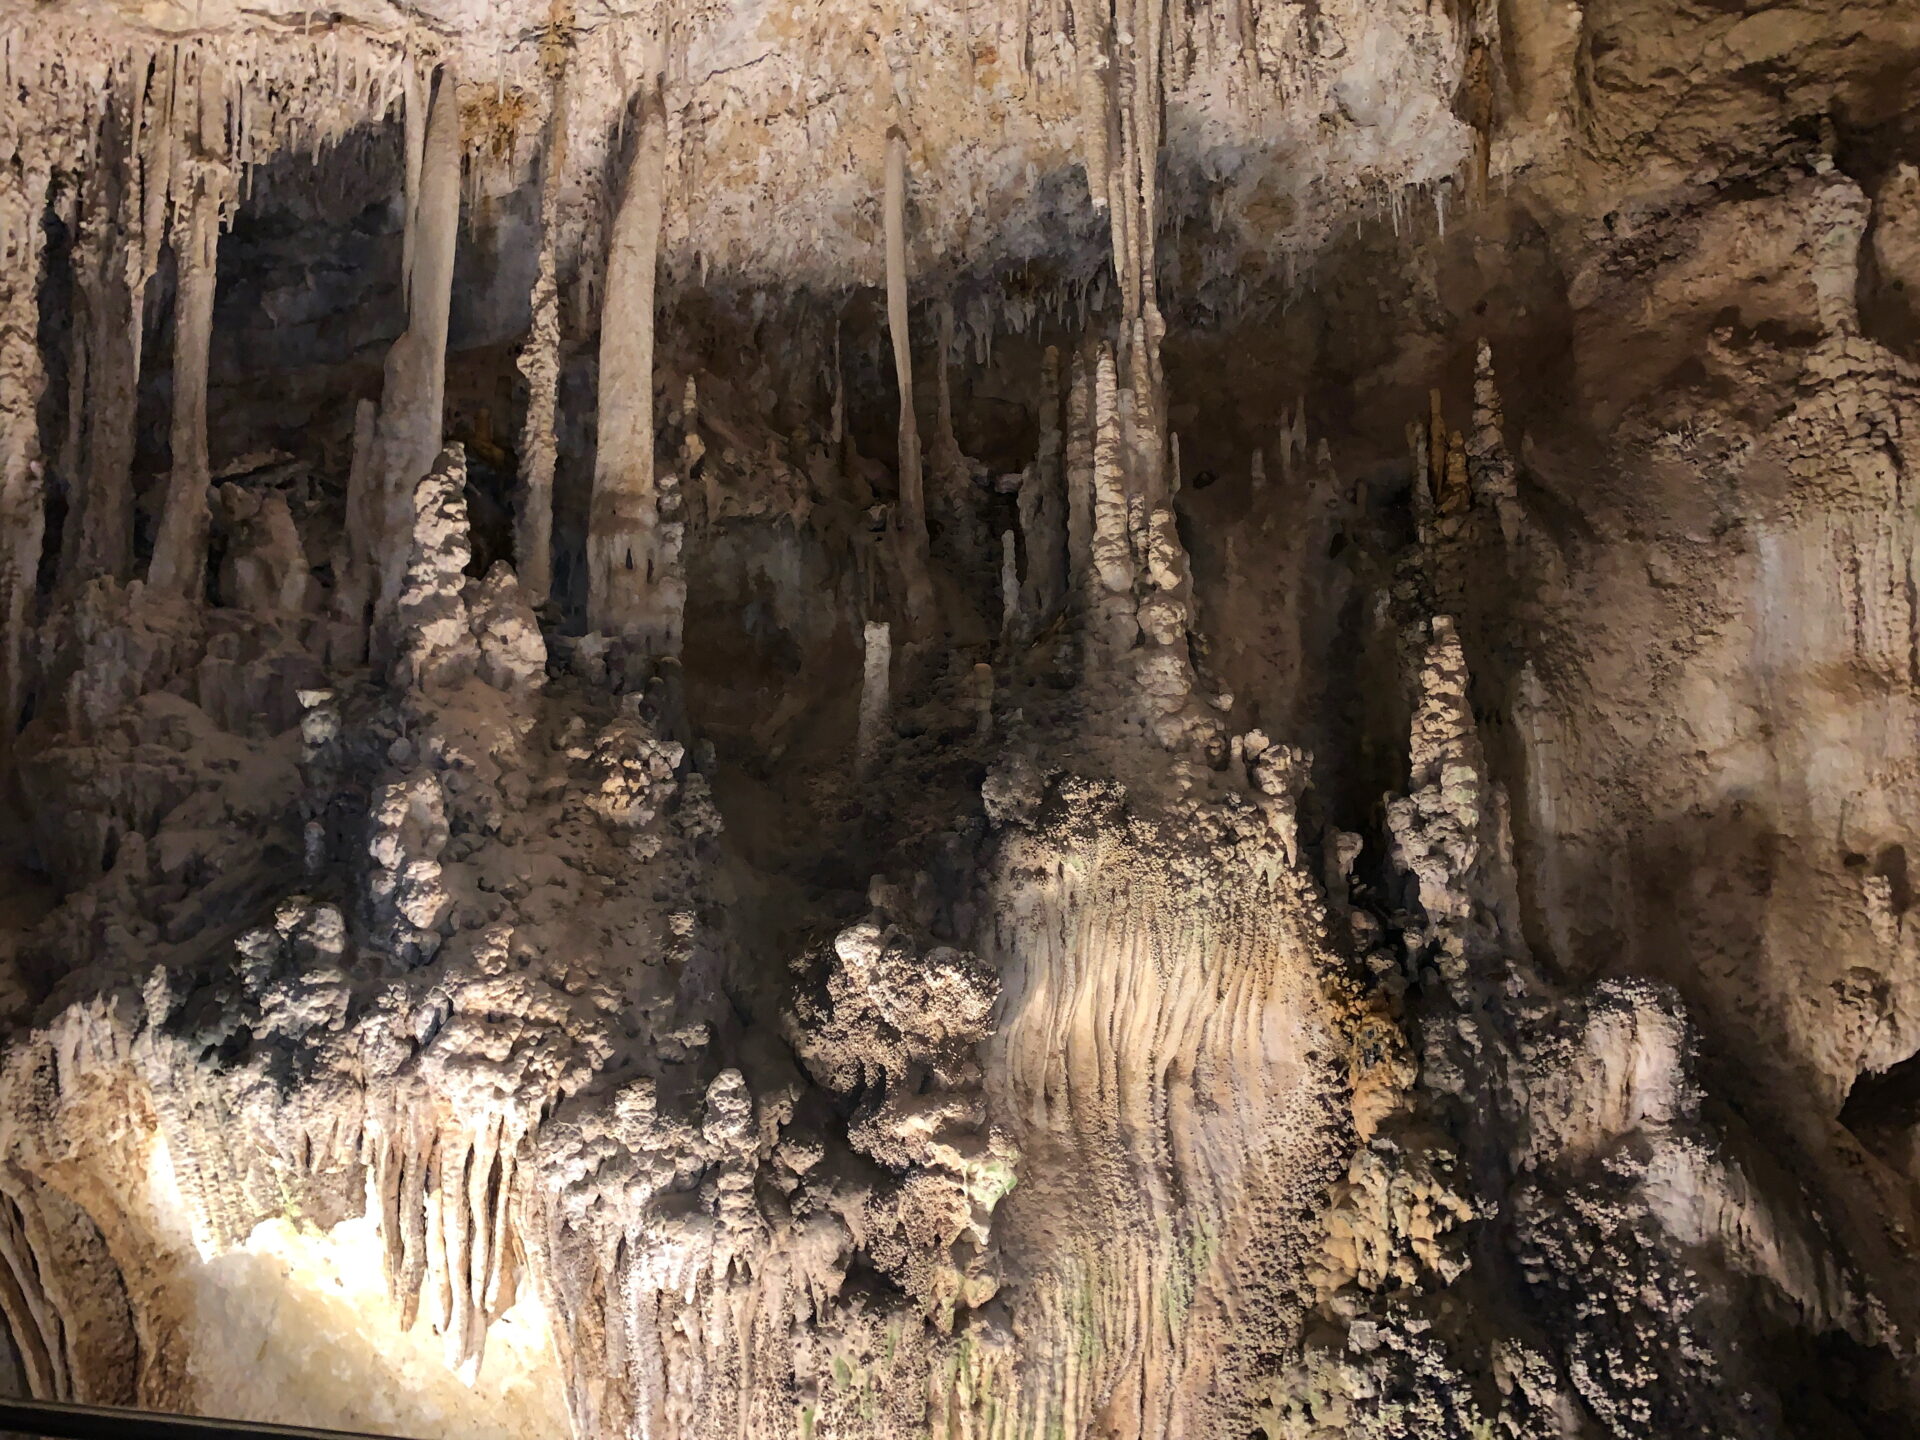 Carlsbad Caverns Self Guided Tour: A Great Way to Explore